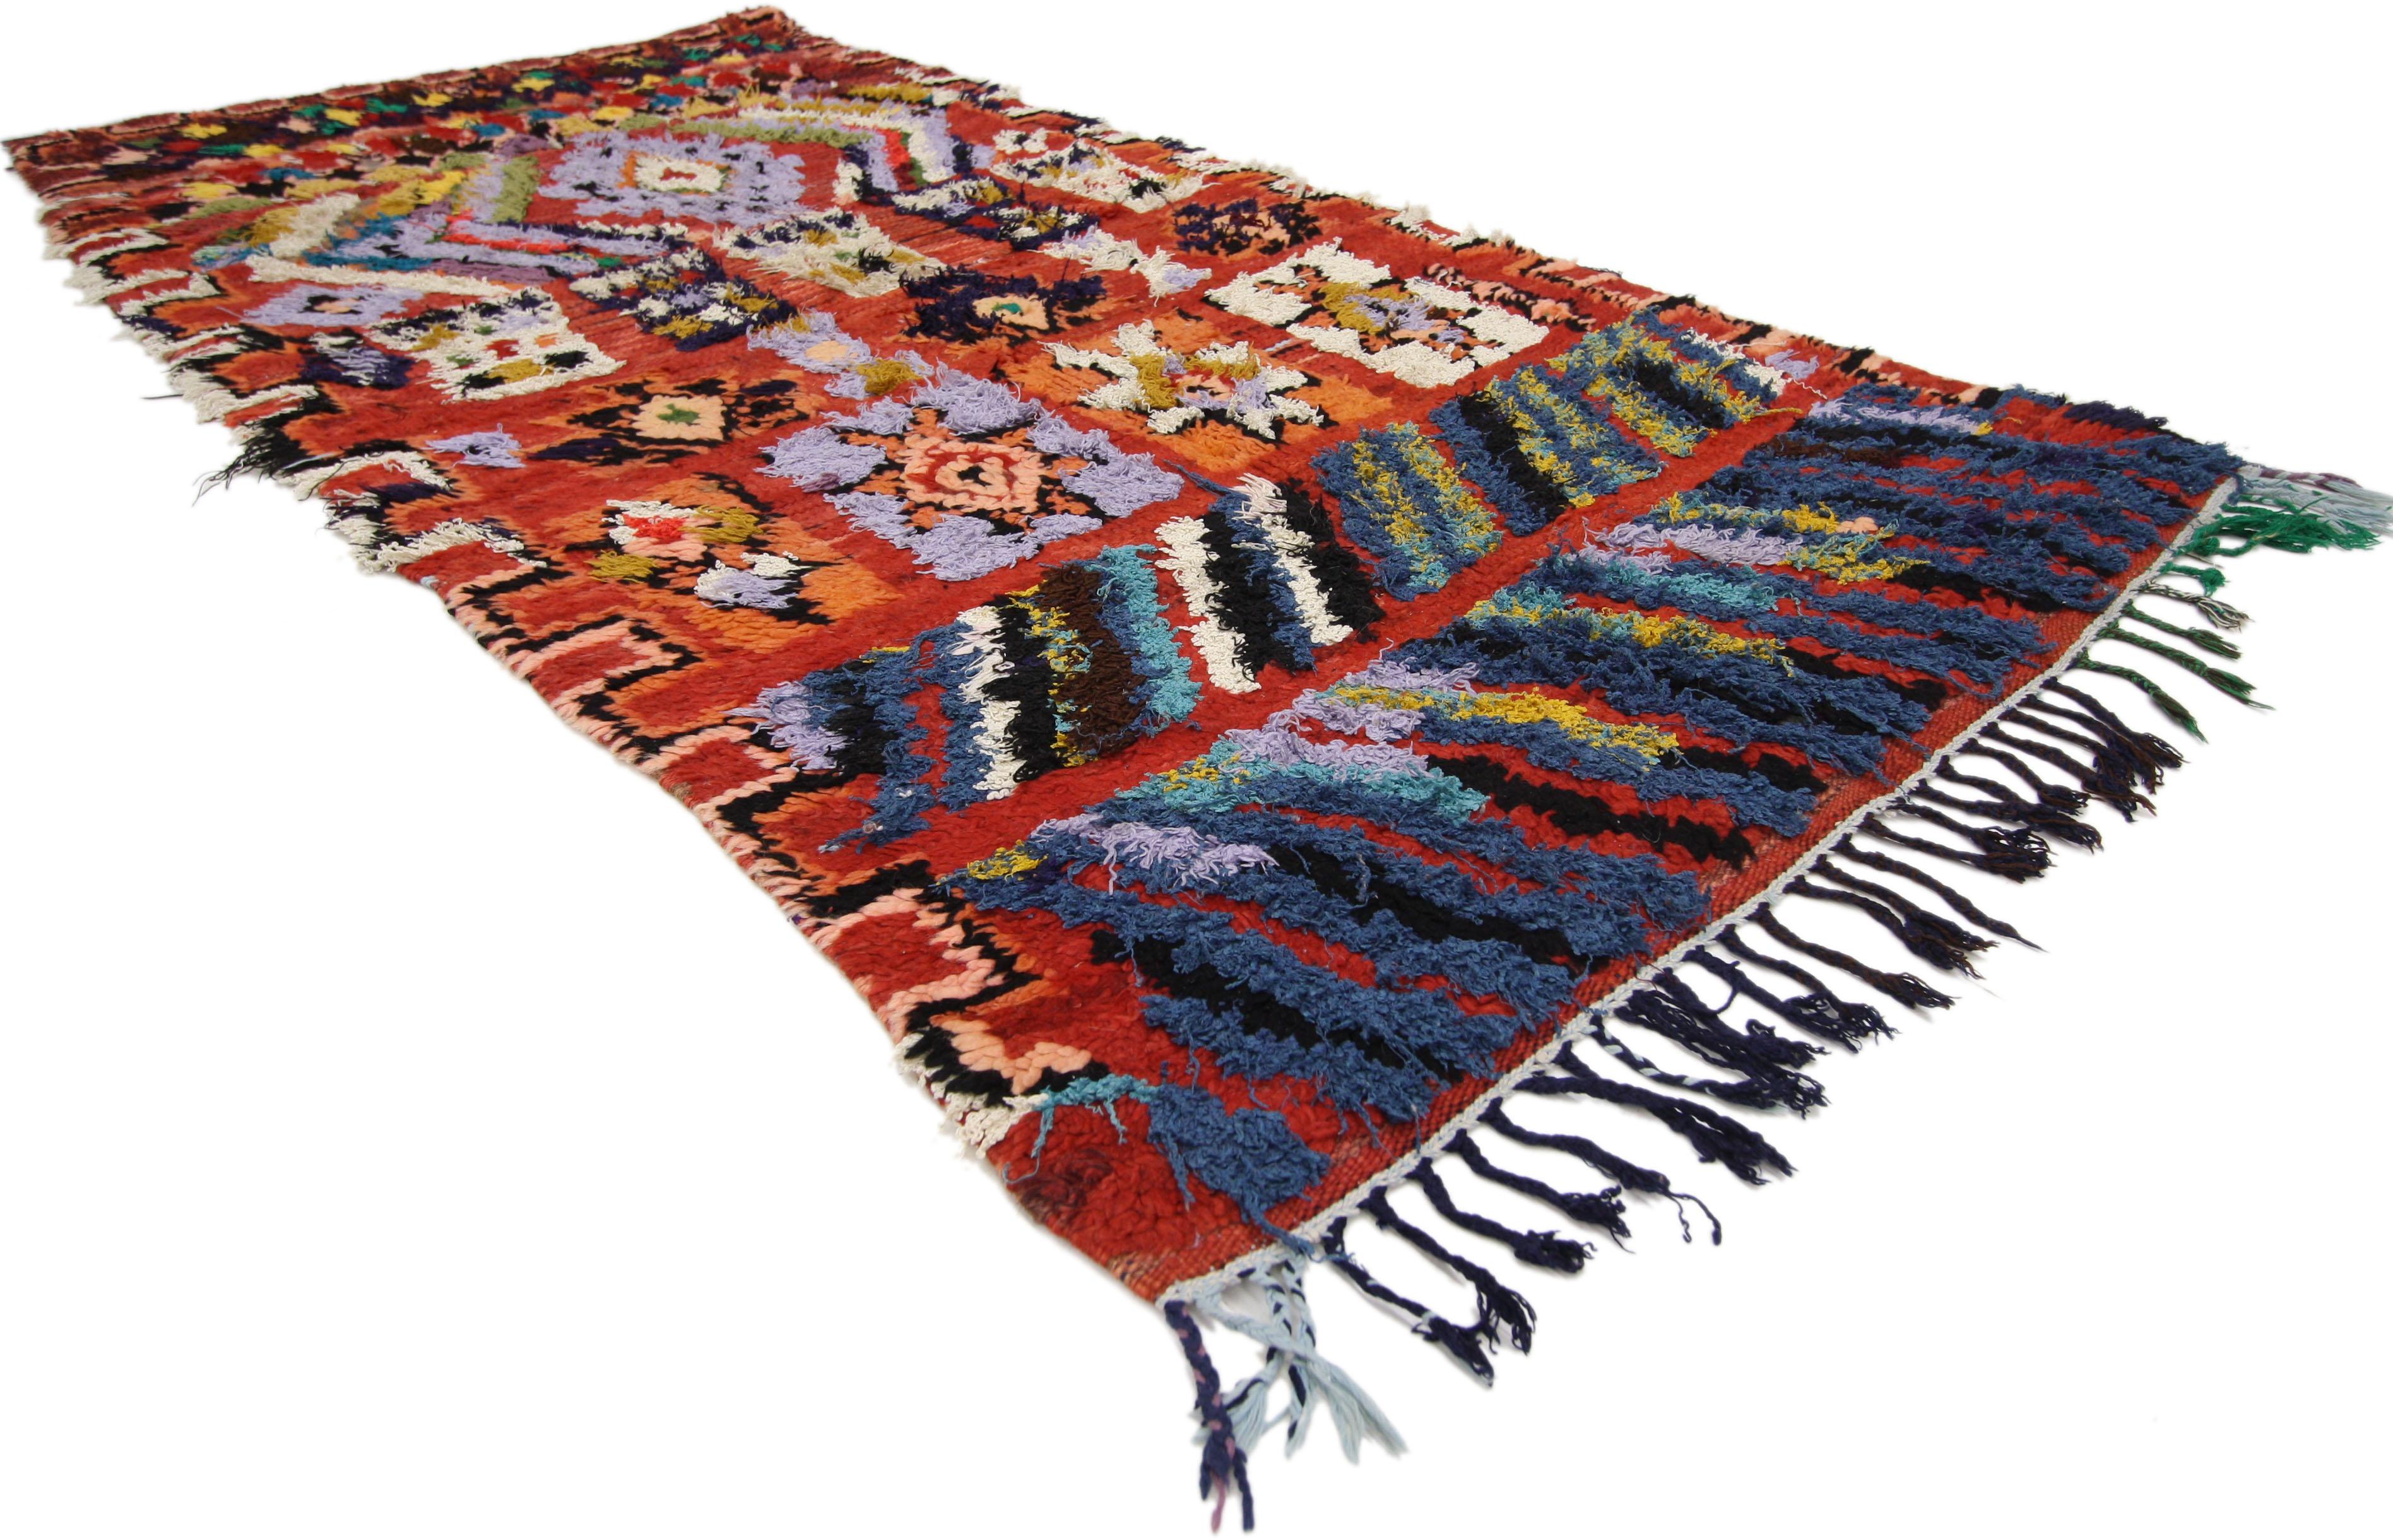 20039 Vintage Berber Moroccan Rug with Modern Tribal Style. Get a rich and exotic look with this vintage Berber red Moroccan rug displaying modern tribal style. With its bold and beautiful abstract tribal composition, this Berber Moroccan rug has